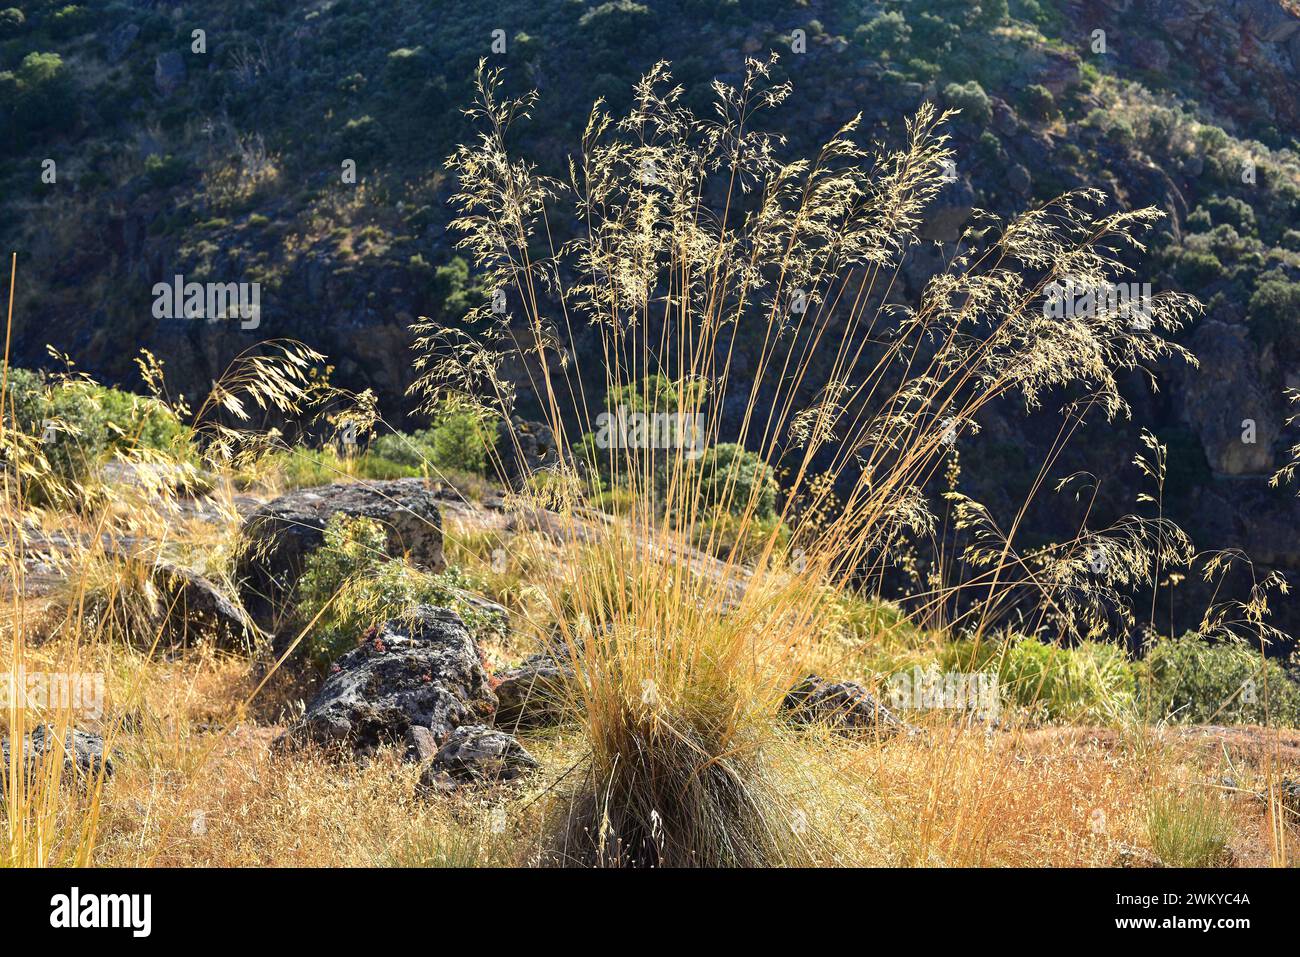 Giant feather grass or golden oats (Stipa gigantea or Celtica gigantea) is a large perennial herb native to center and southern Iberian Peninsula and Stock Photo